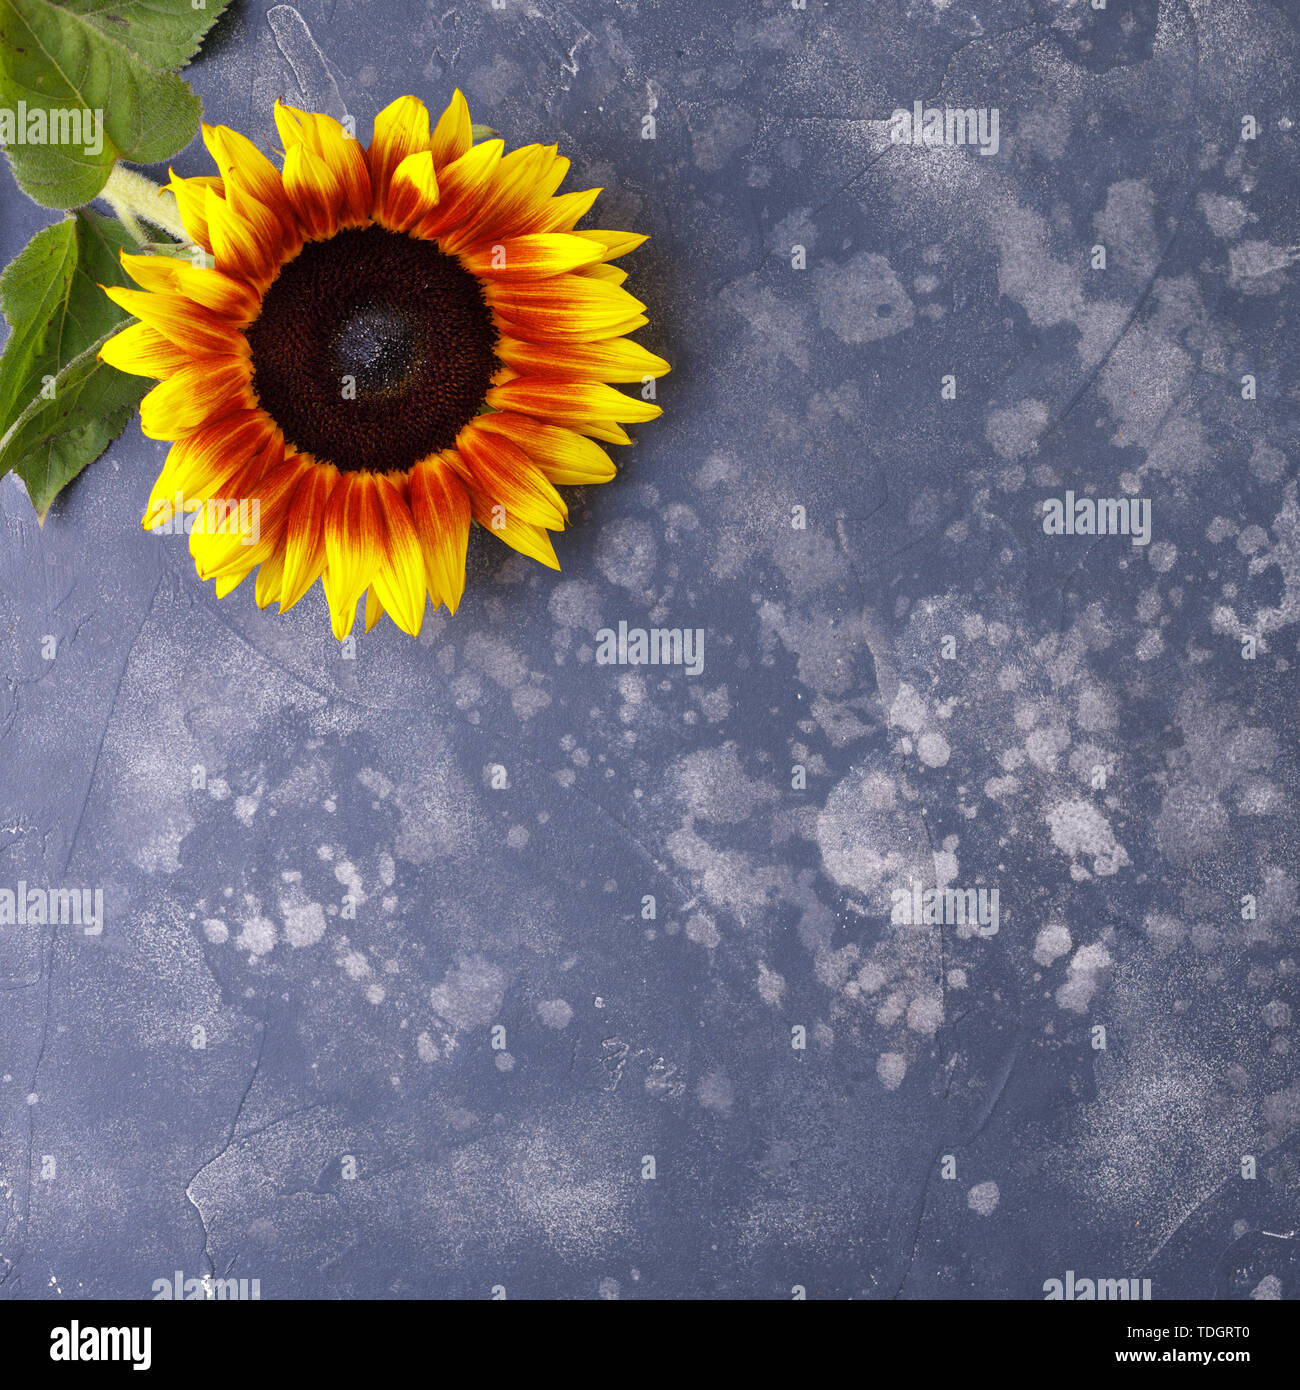 Beautiful, yellow sunflower on a black background, top view, close-up. An interesting, unusual and creative look. Flat lay. Stock Photo